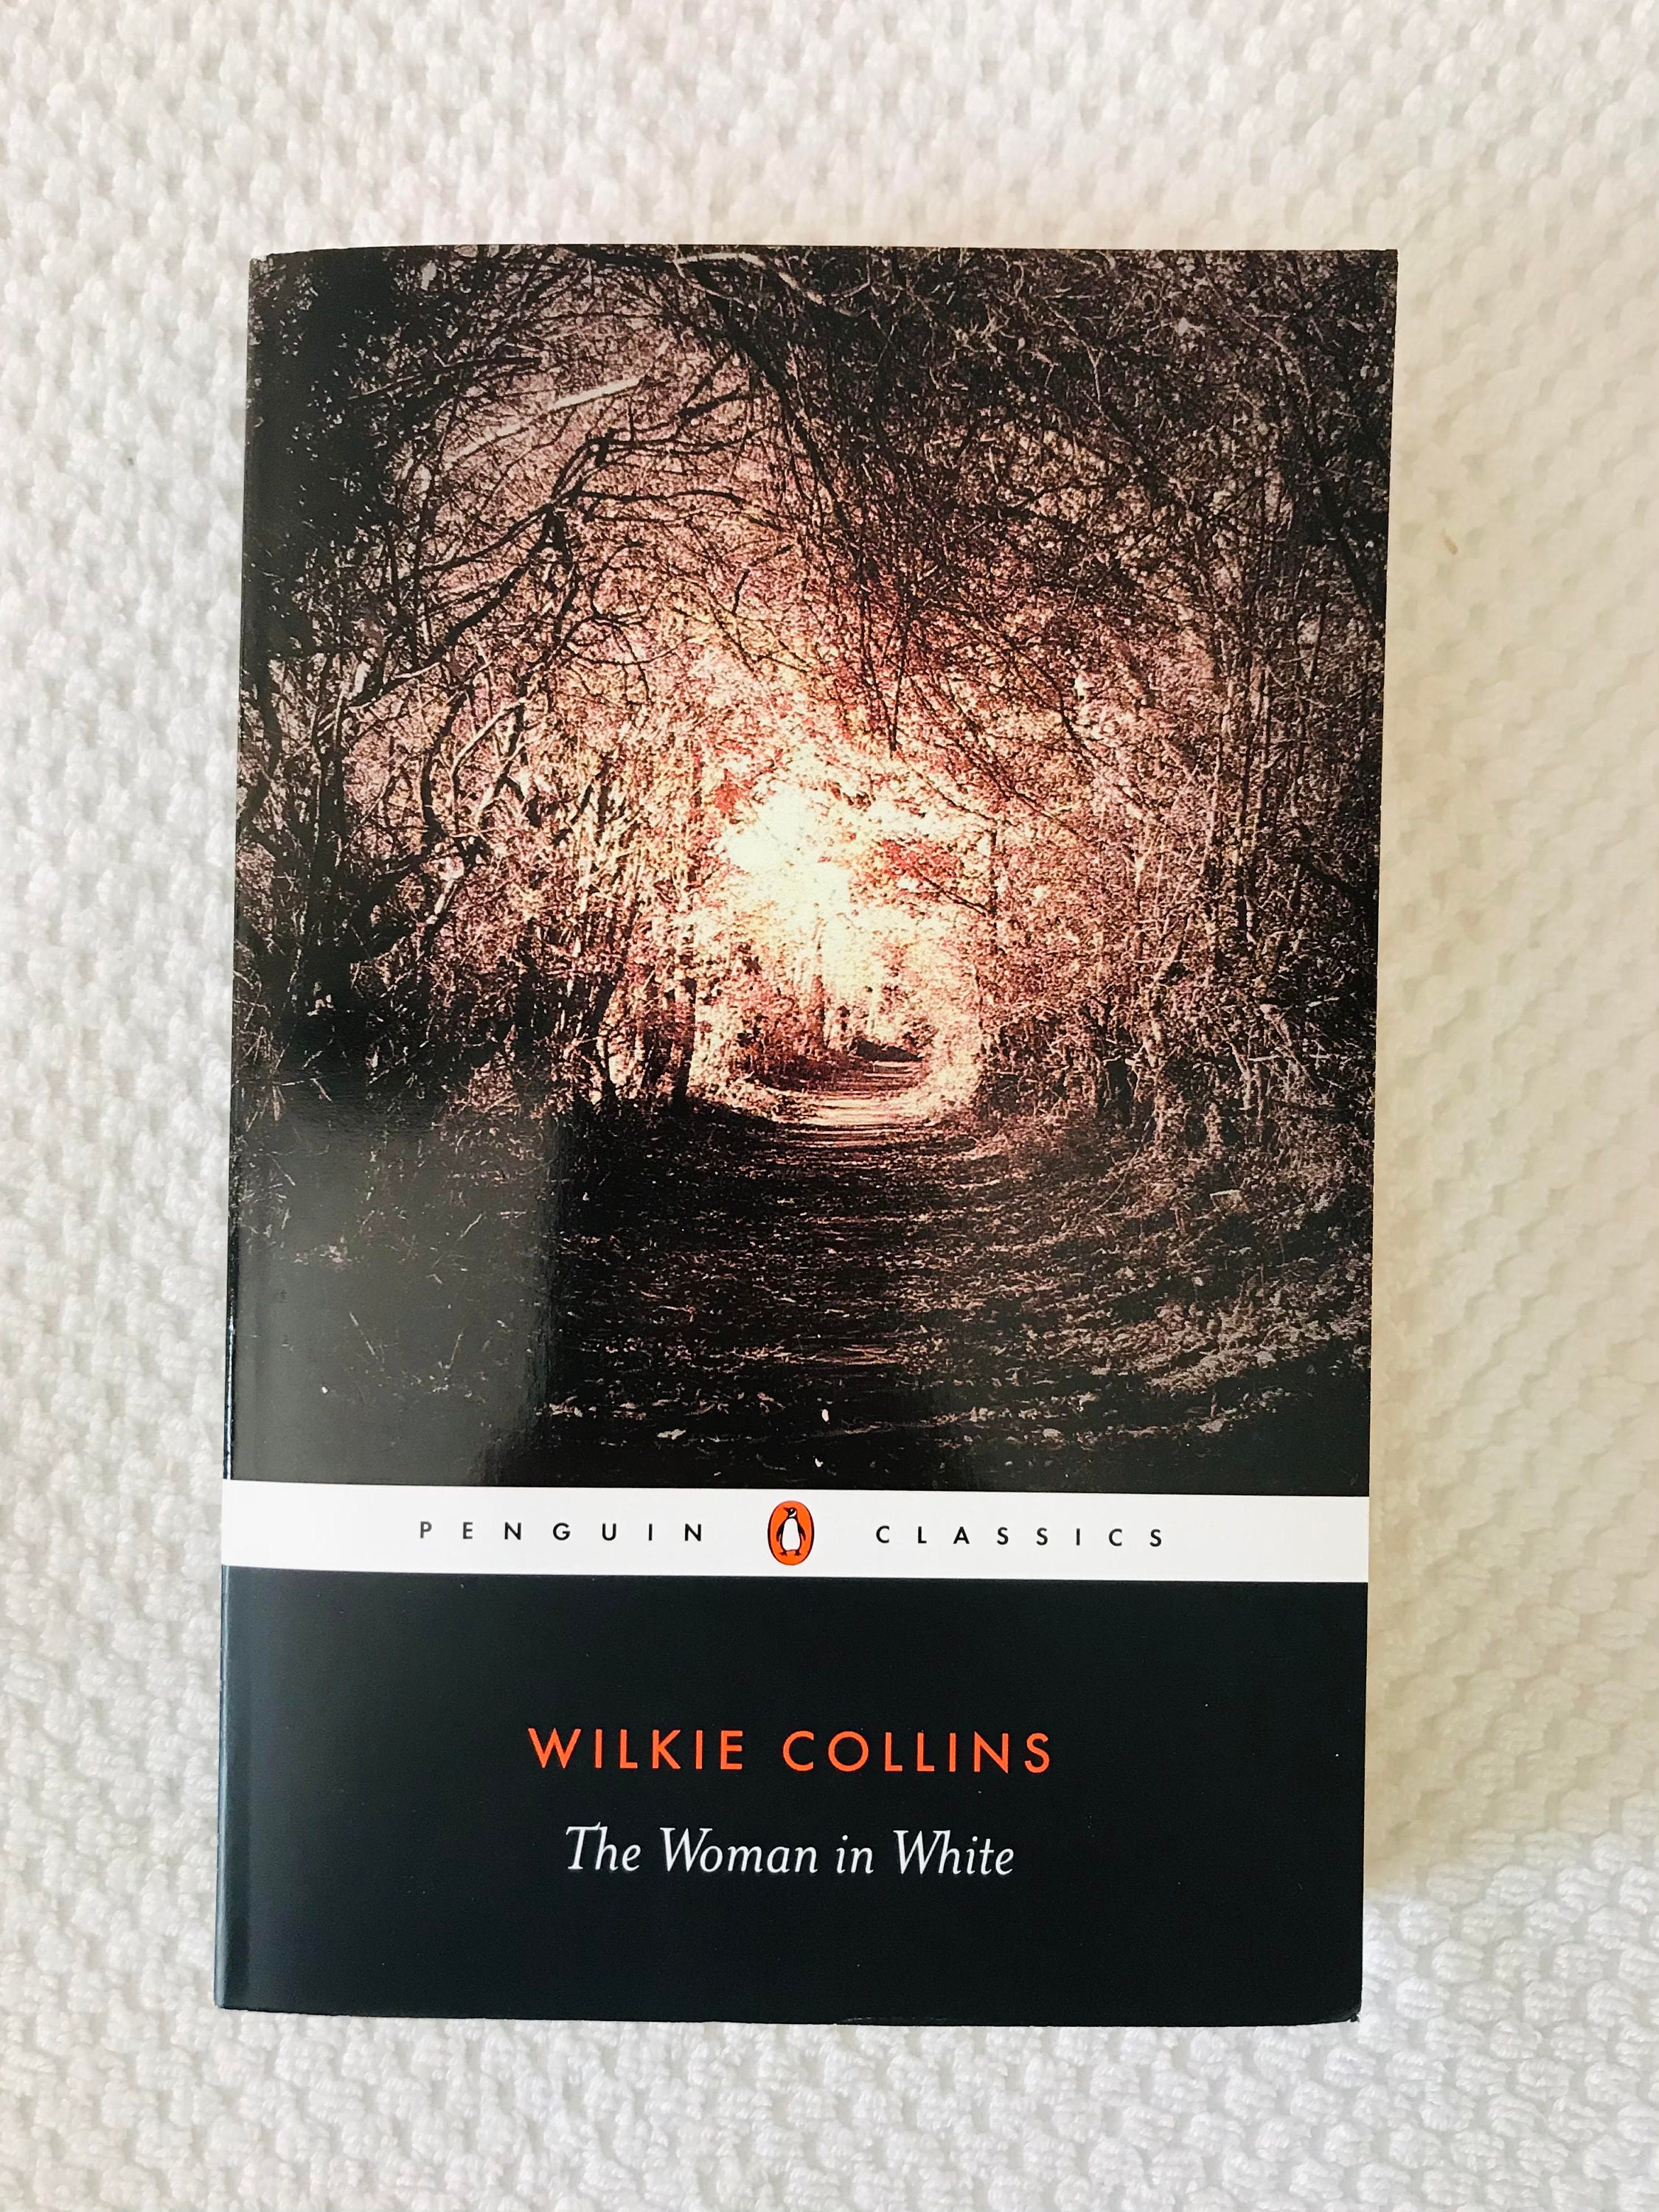 The Woman in White eBook by Wilkie Collins